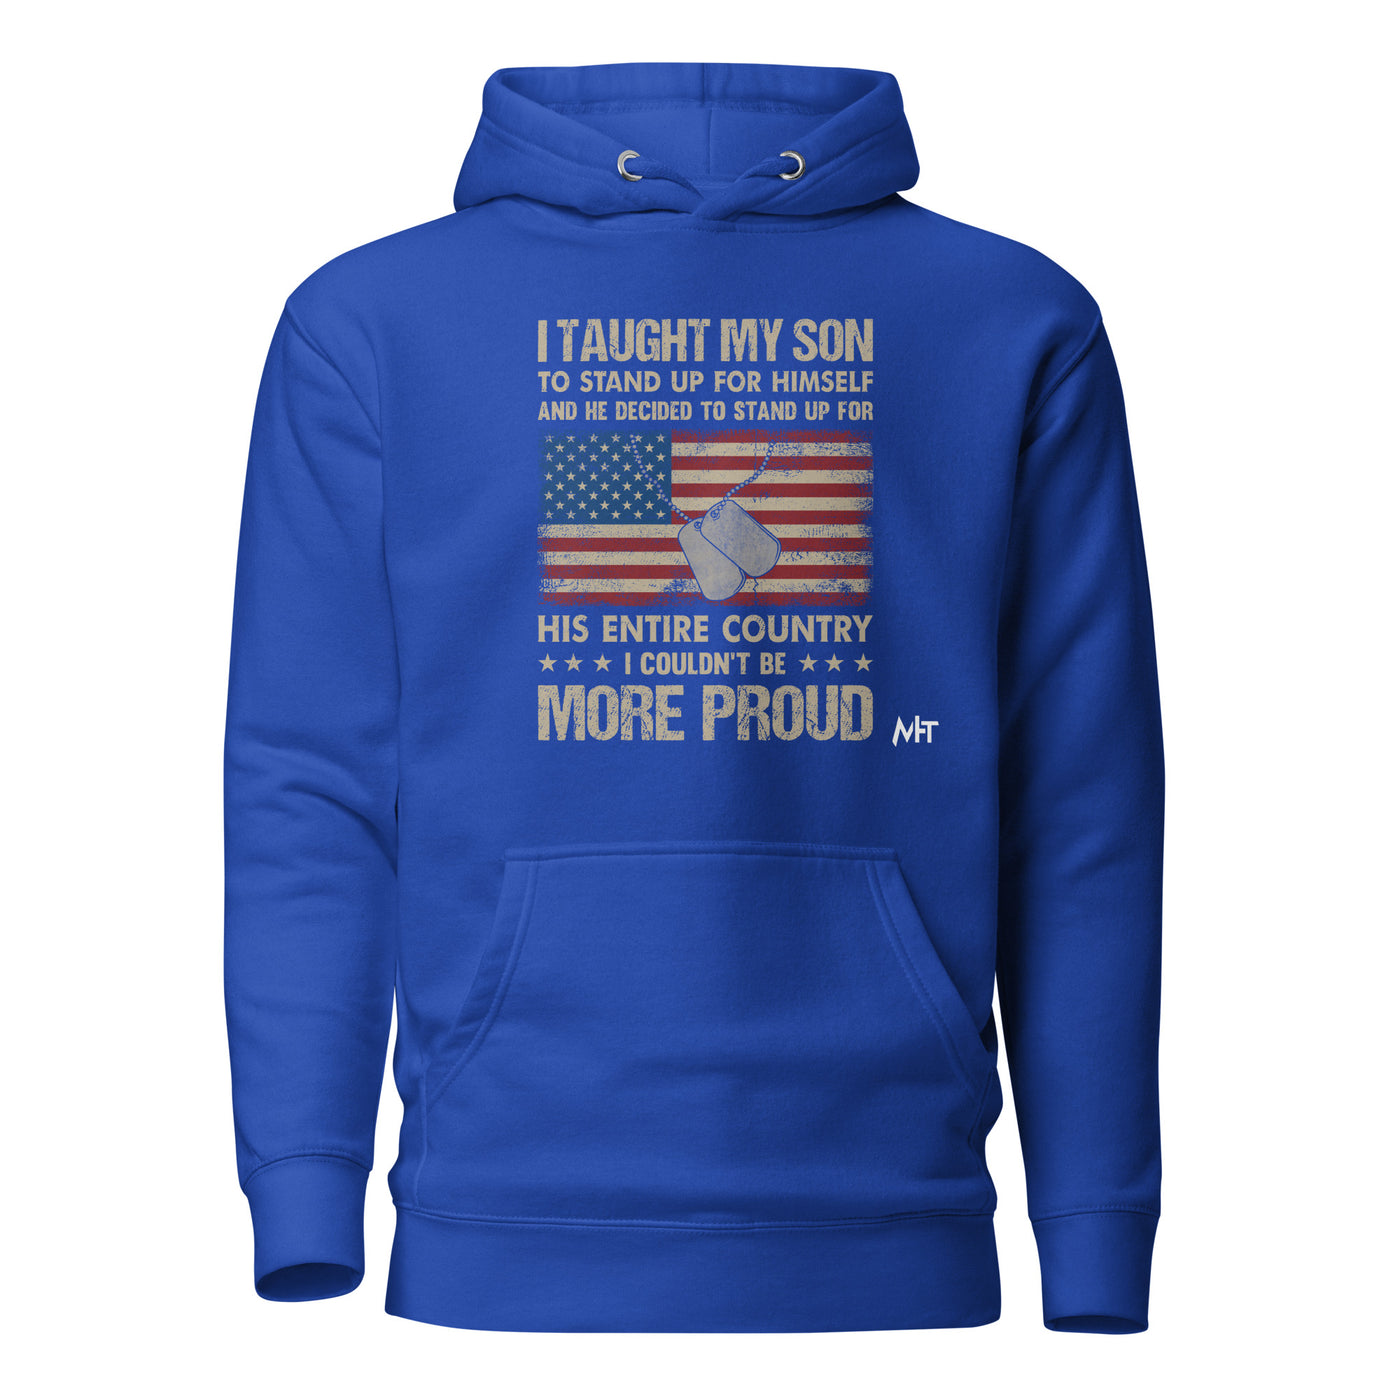 I Taught my son to Stand up for himself - Unisex Hoodie